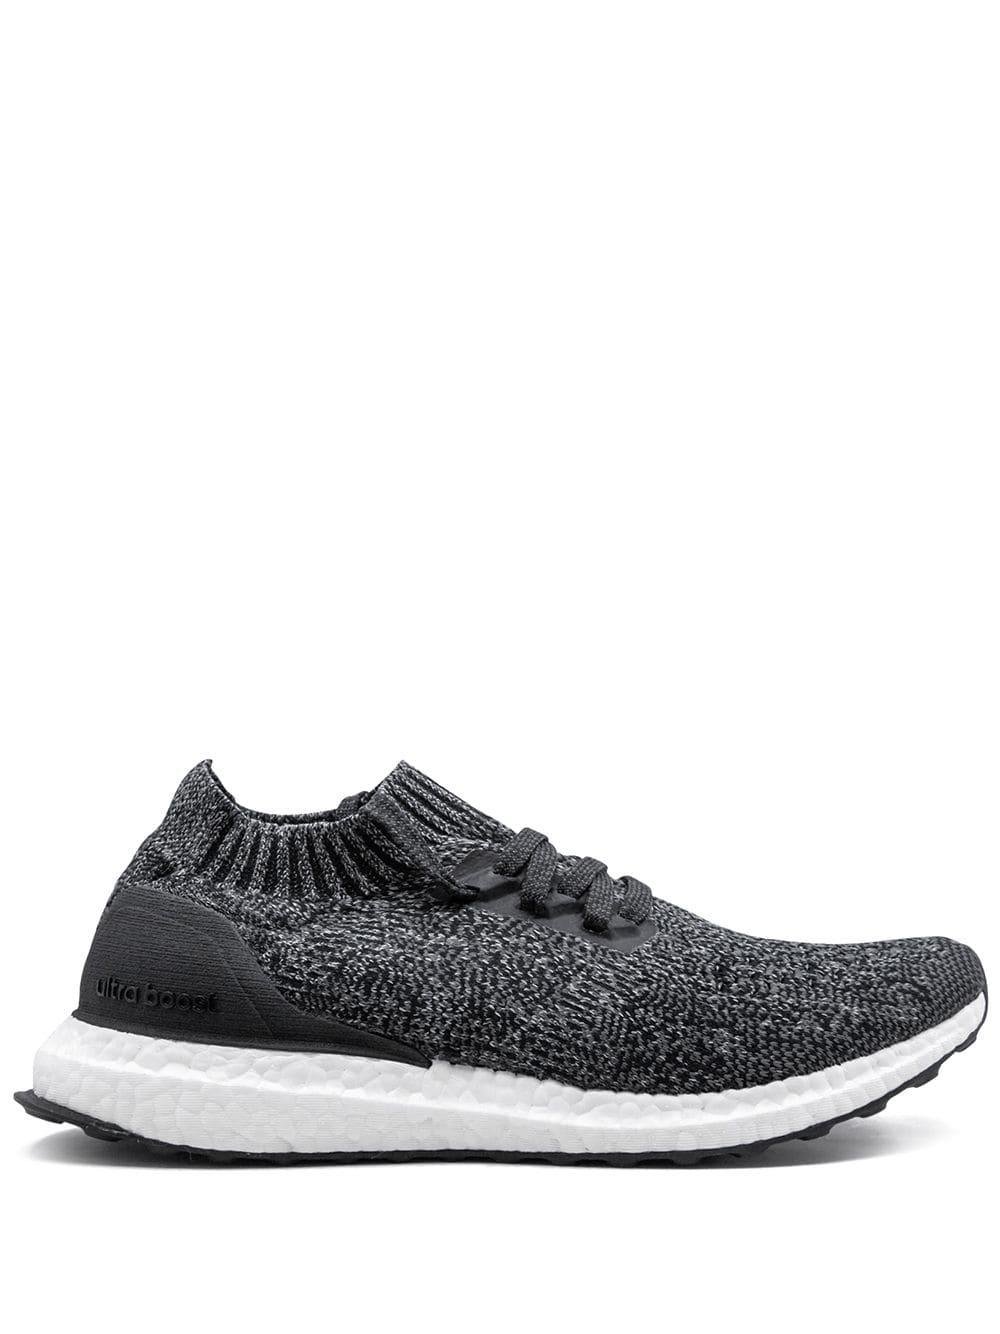 adidas Synthetic Ultraboost Uncaged 